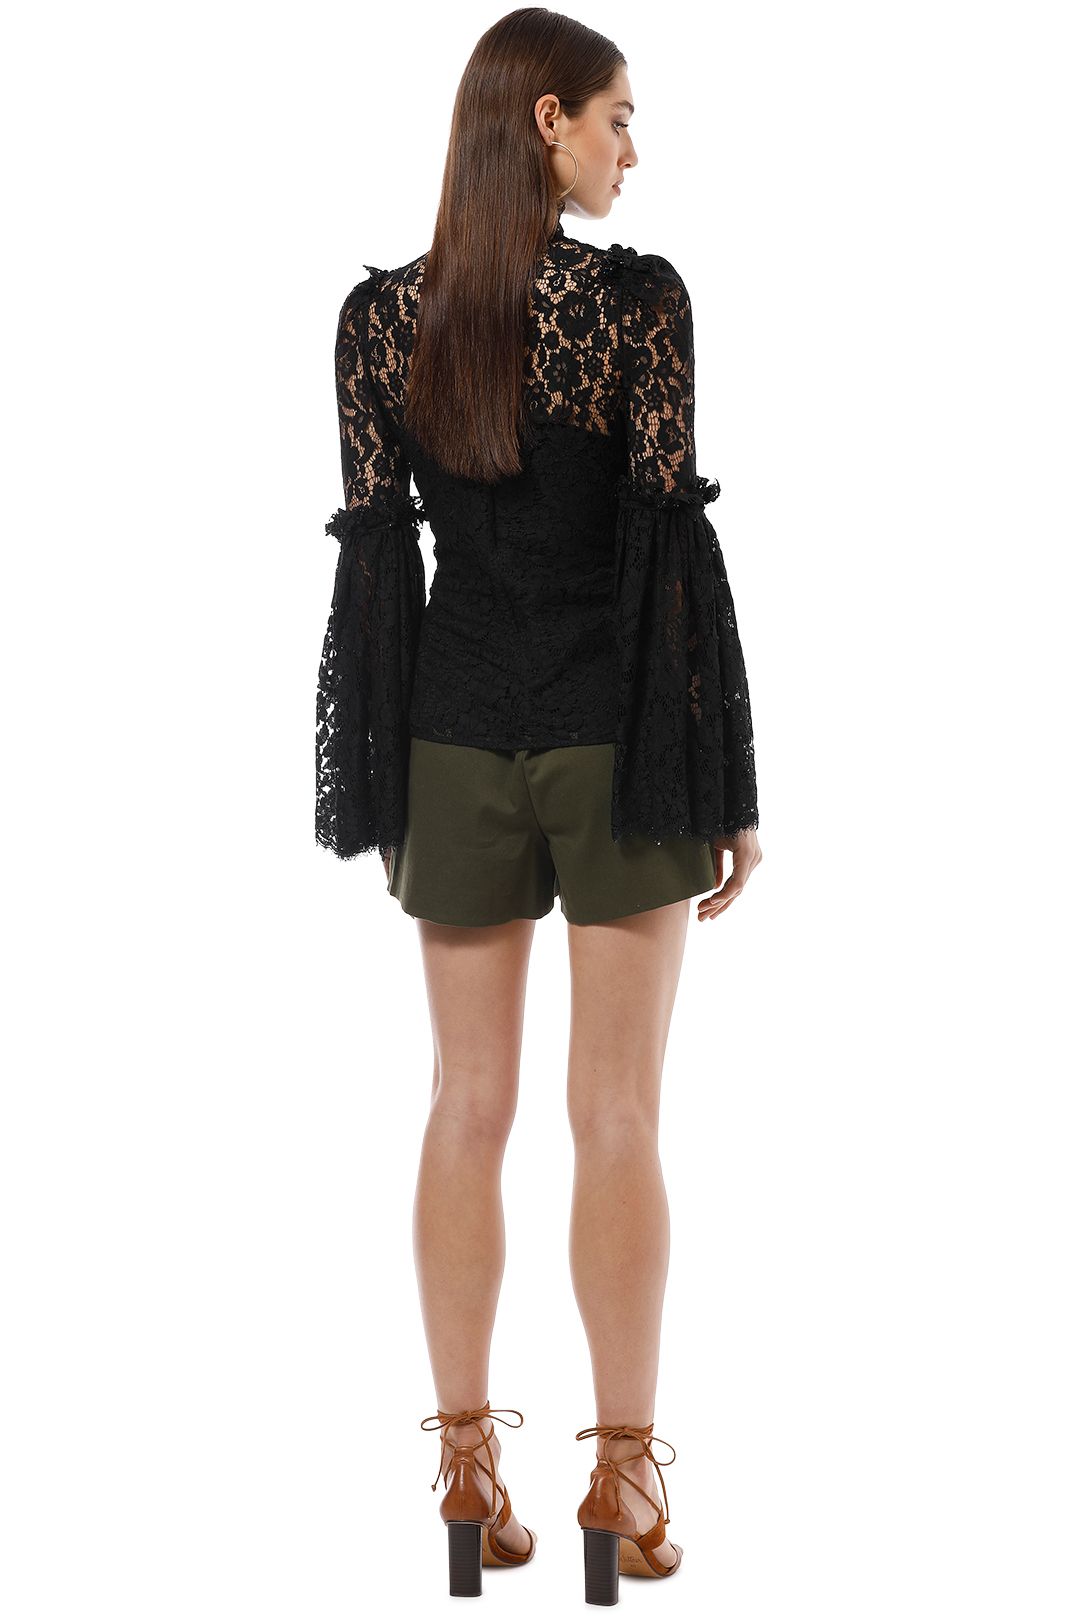 Camilla and Marc - Clemence Top - Black - Back